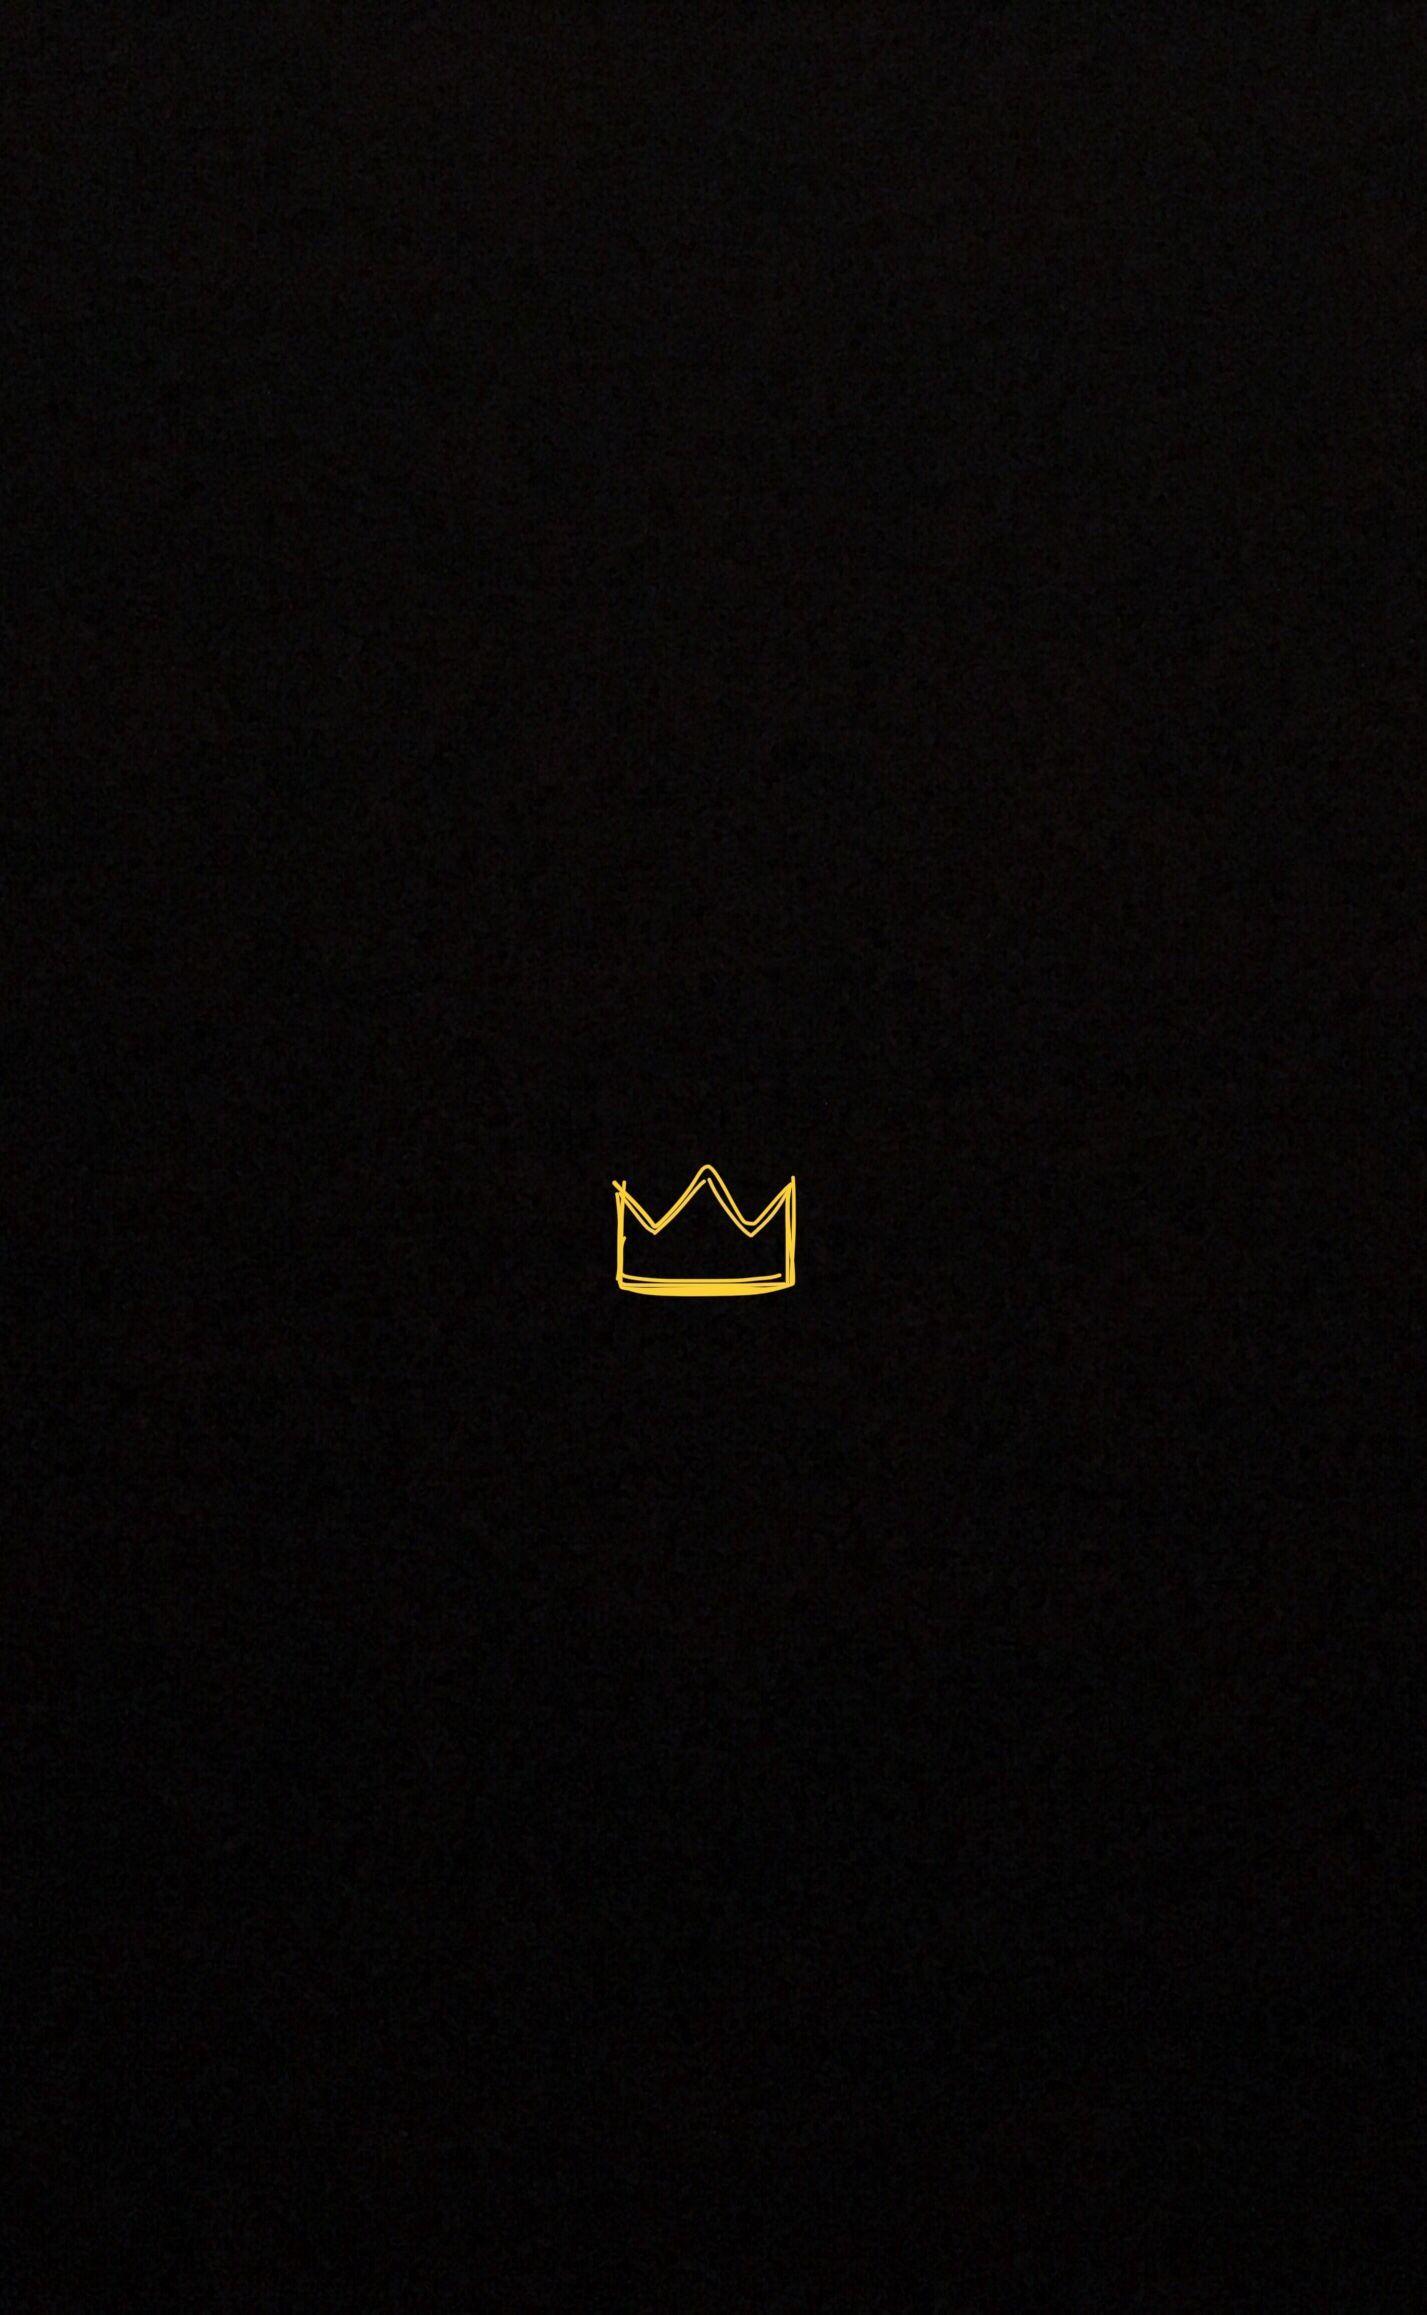 Crown iPhone Wallpaper Free Crown iPhone Background